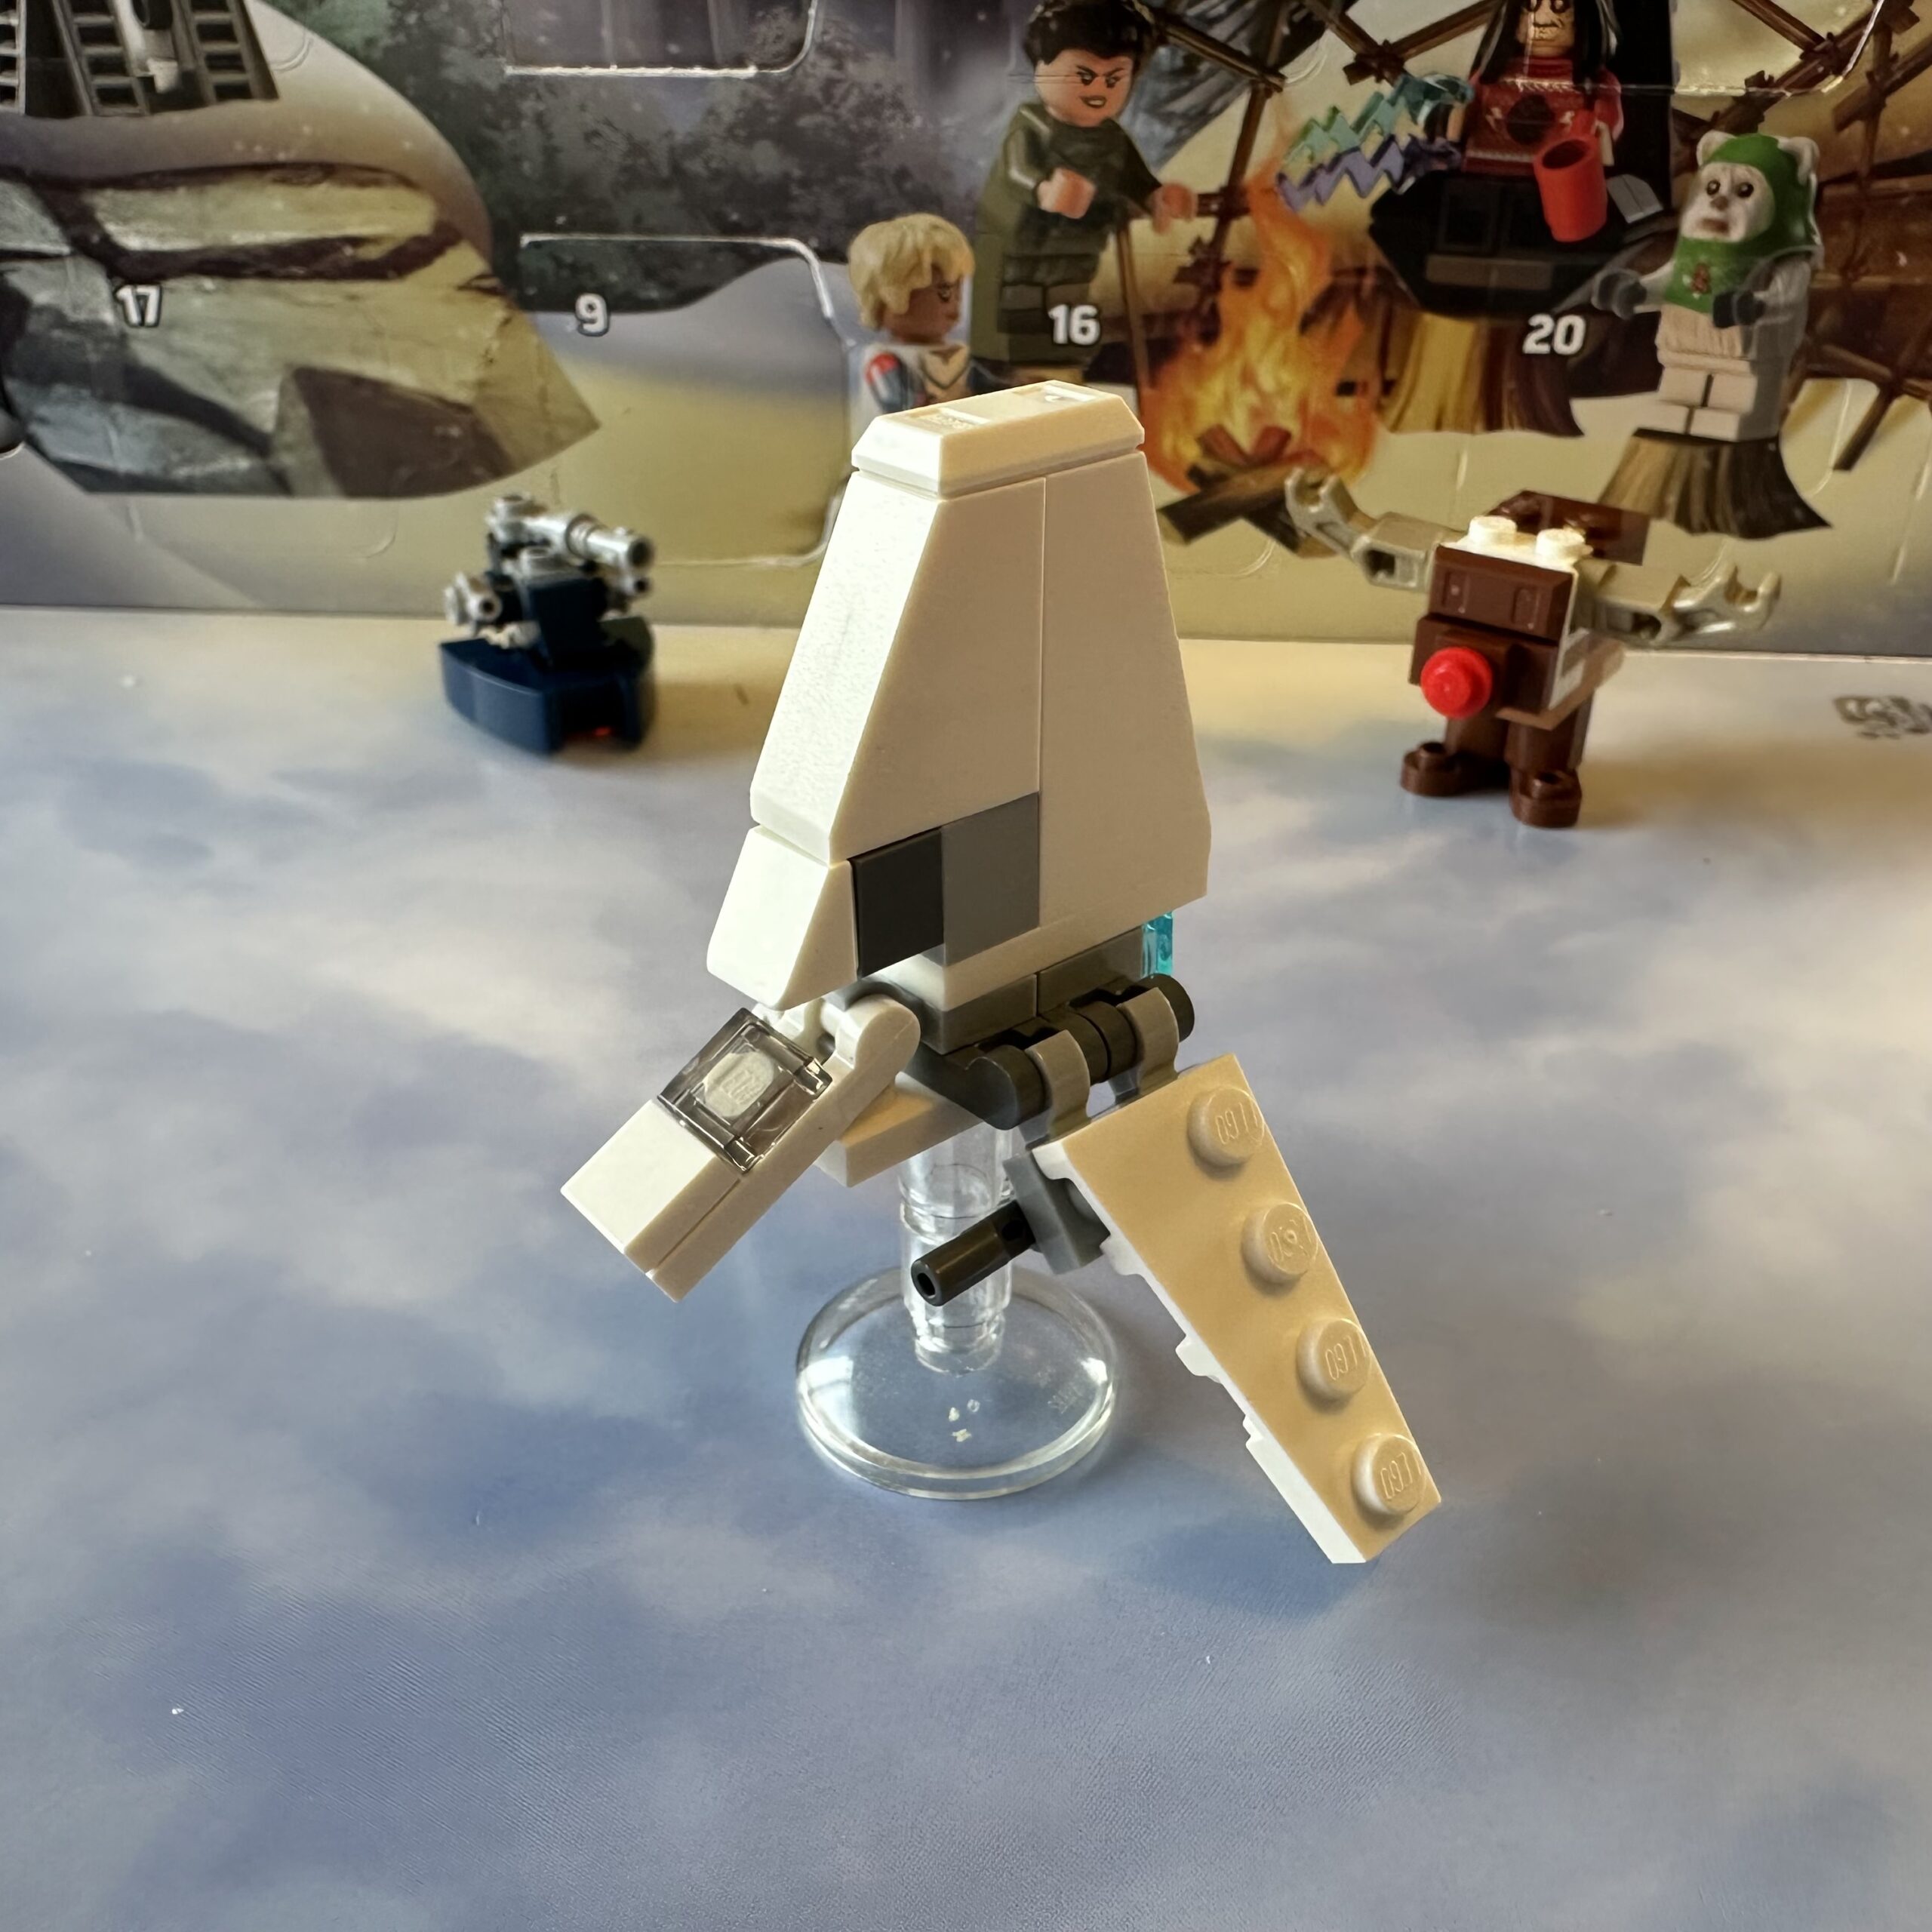 LEGO micro-build of an Imperial shuttle in white. It has a large vertical upper fin and two wings that angle down.